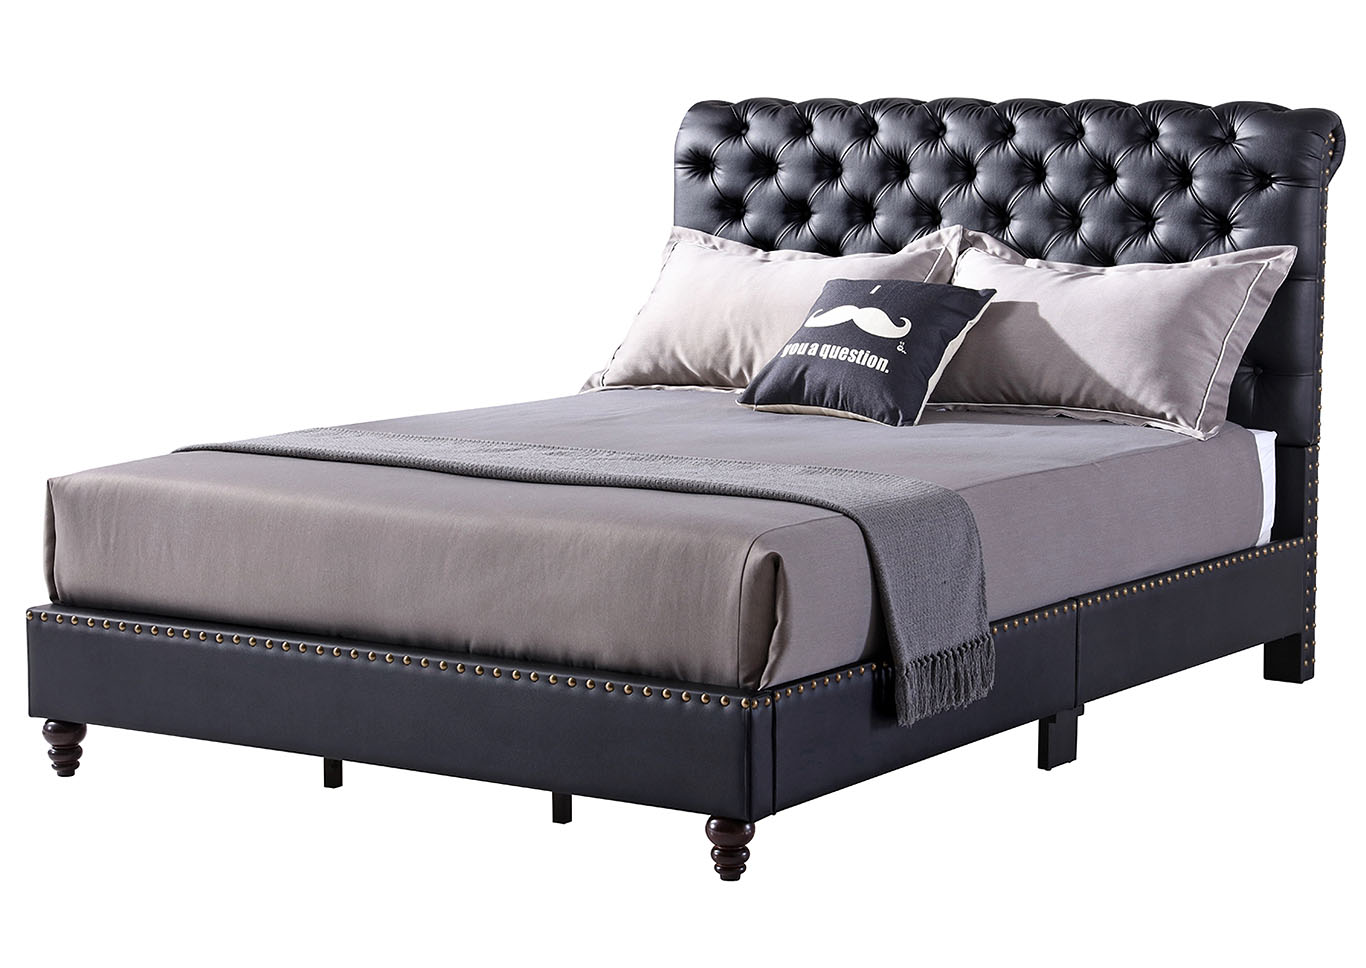 Black Faux Leather Tufted Upholstered, Leather Tufted Beds